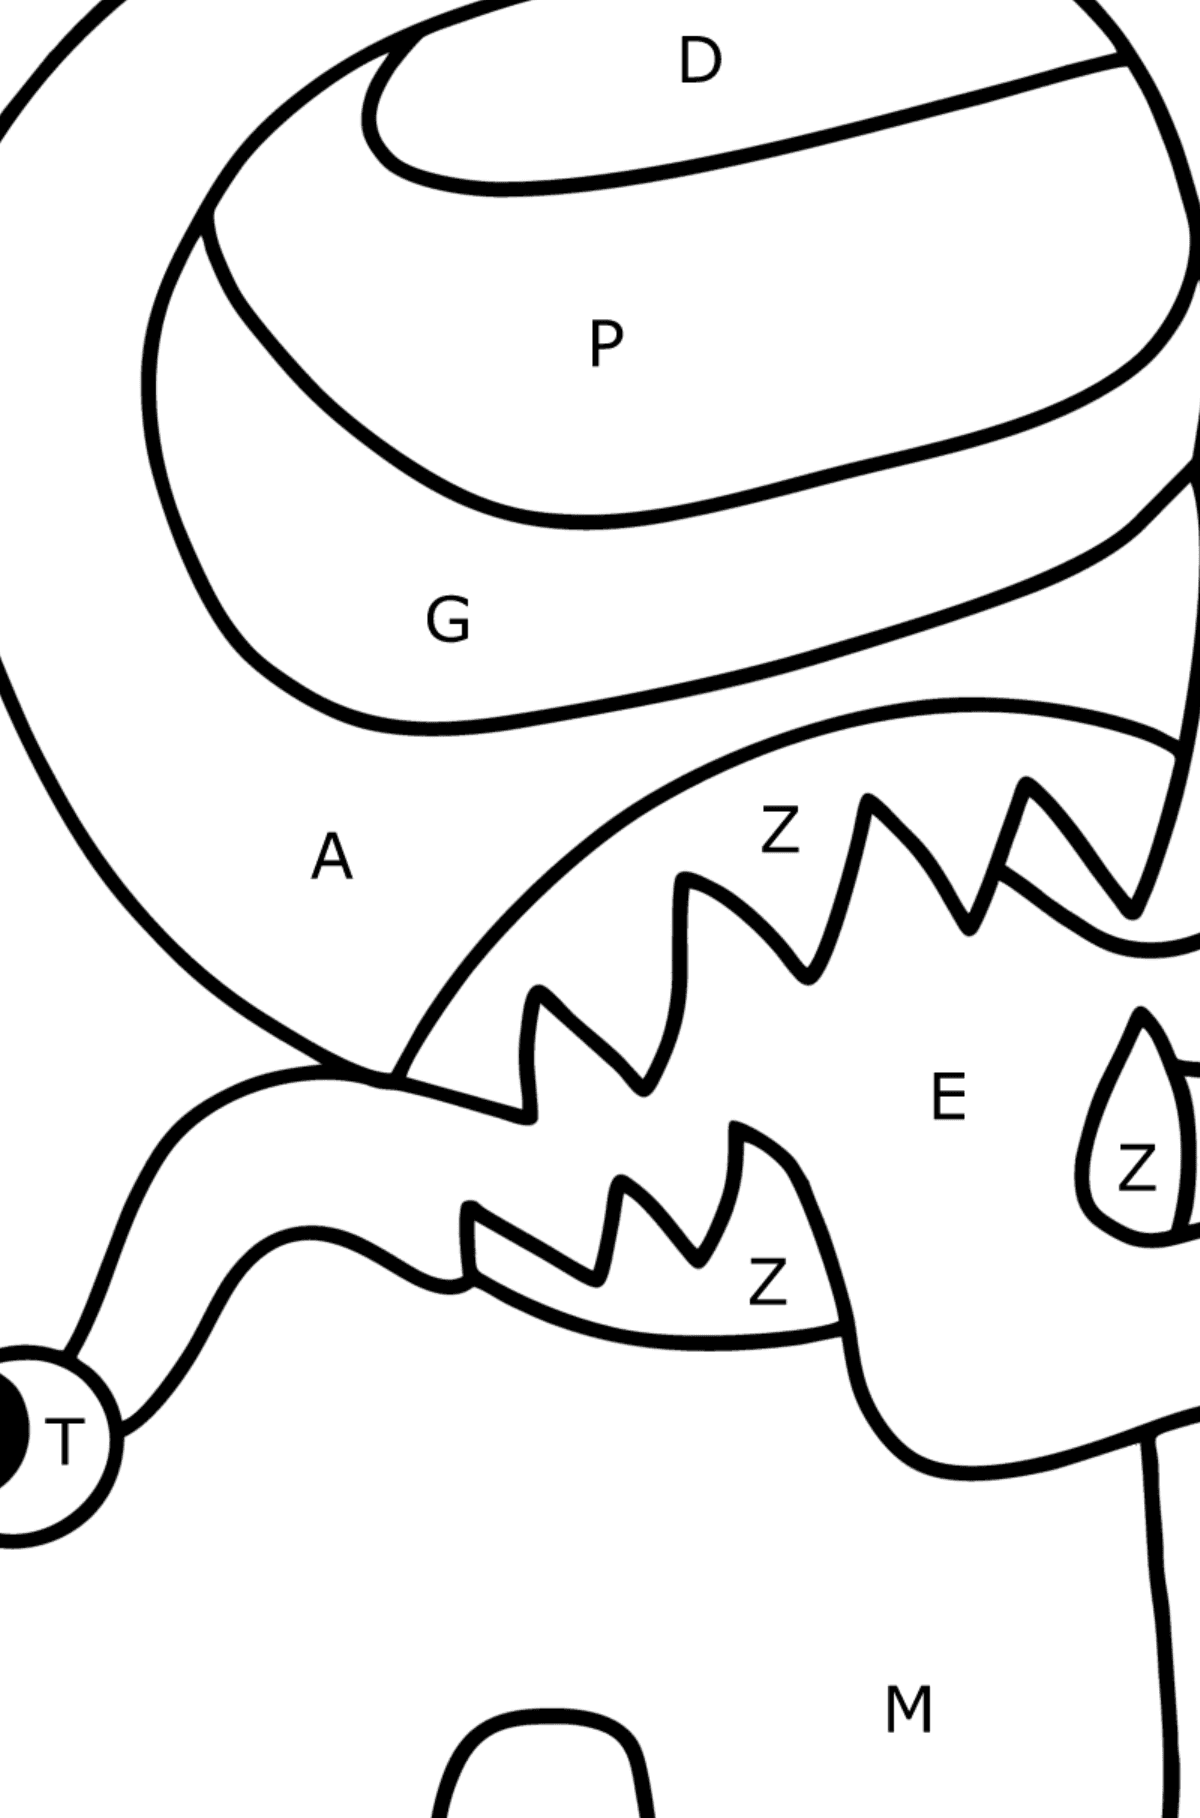 Among Us coloring page for Free - Coloring by Letters for Kids